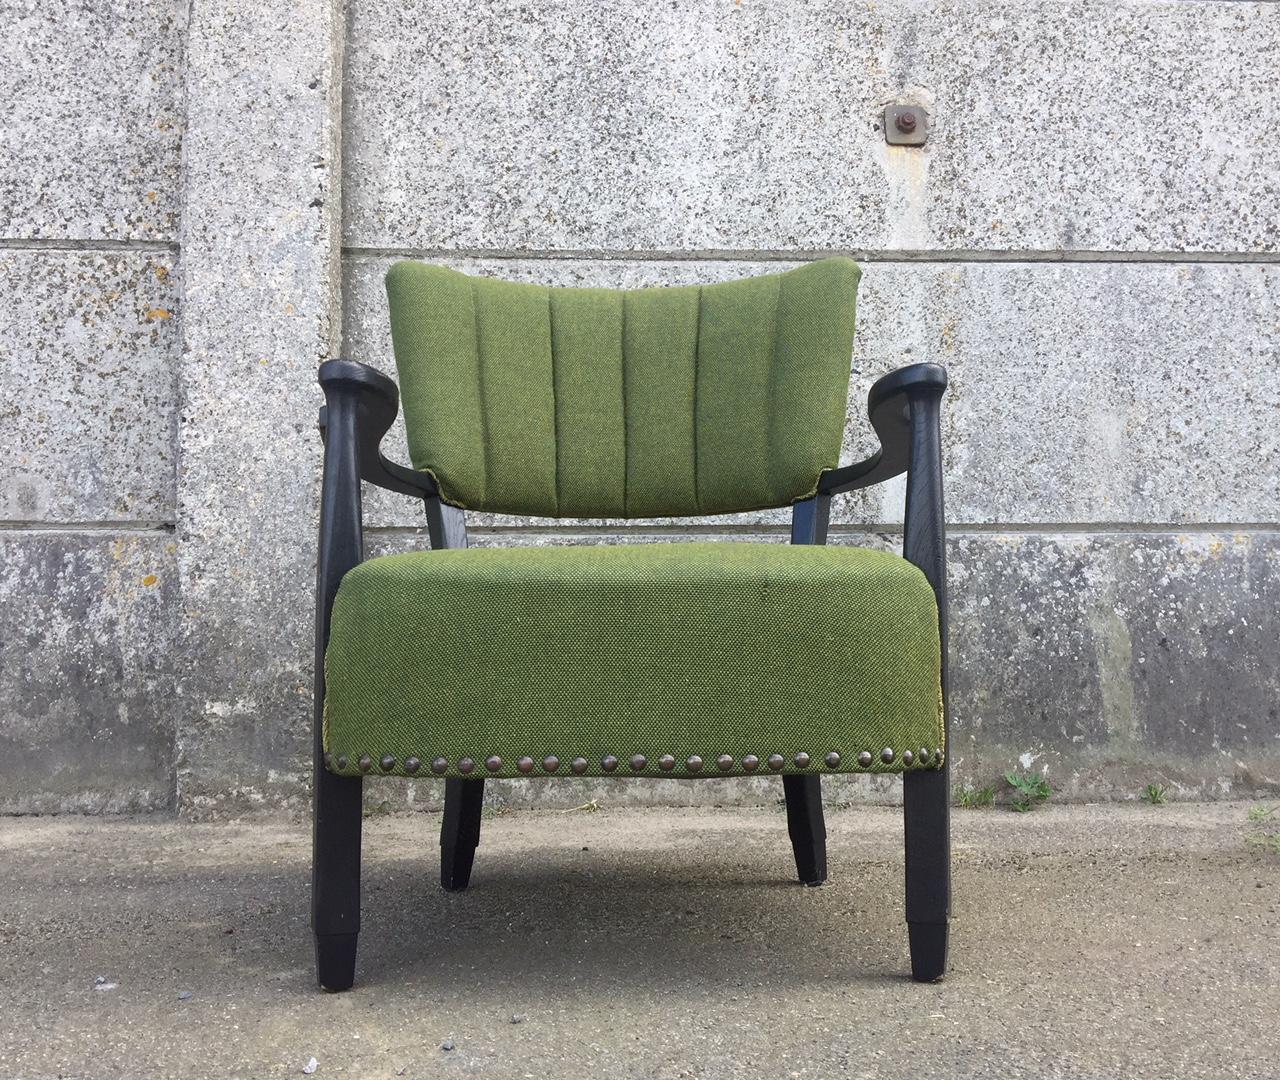 An easy chair by a Danish cabinetmaker. With a black painted wooden frame and a green wool riveted upholstery. A low-seat chair in a style reminiscent of Otto Schulz and Flemming Lassen.